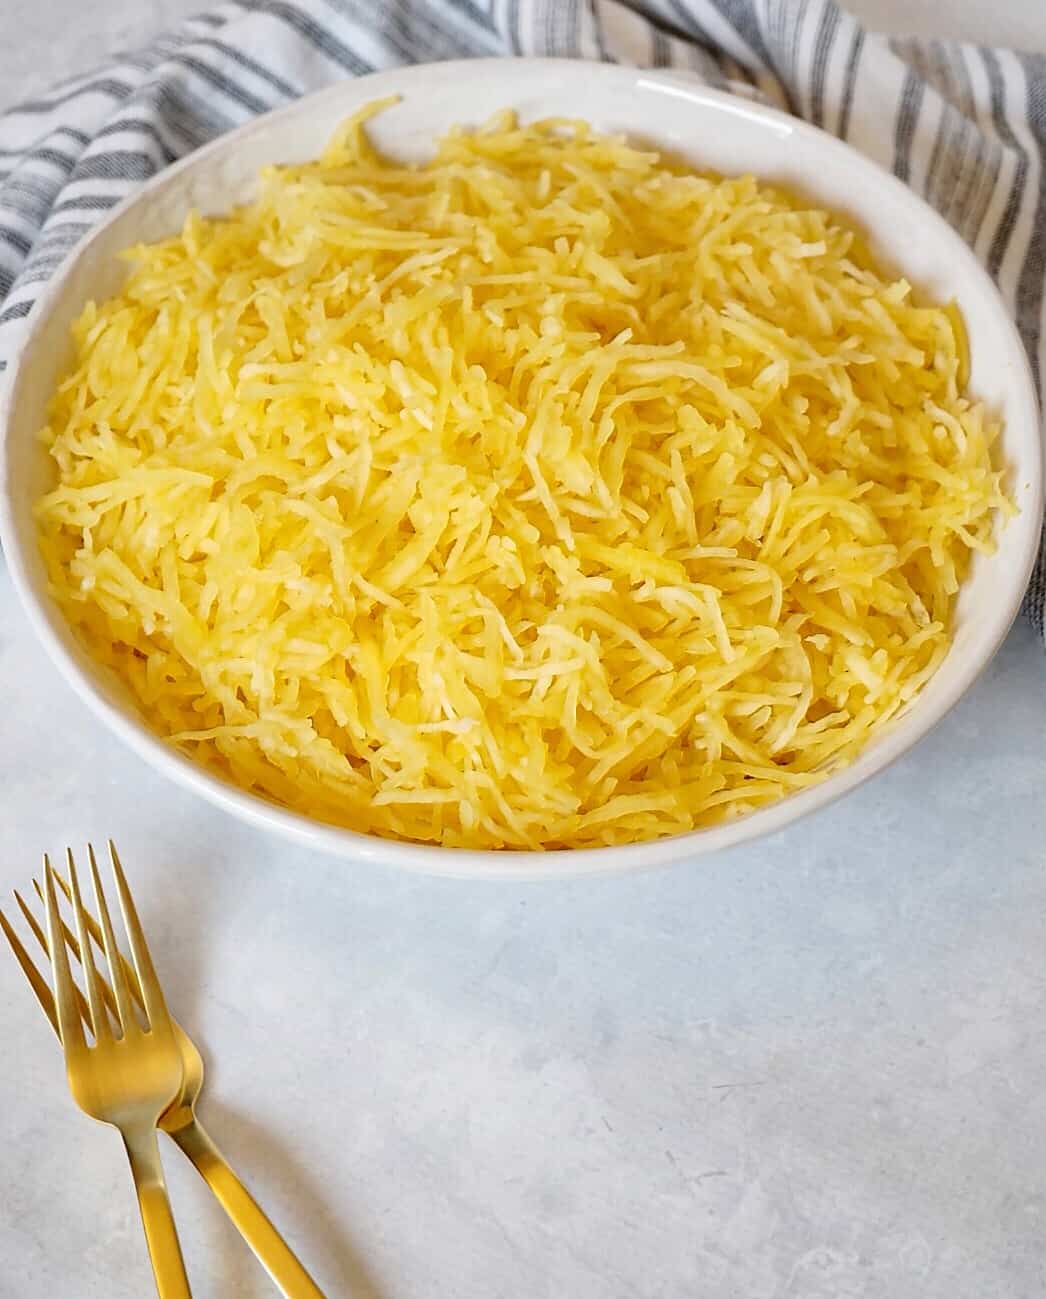 Spaghetti squash in a white bowl with two gold forks